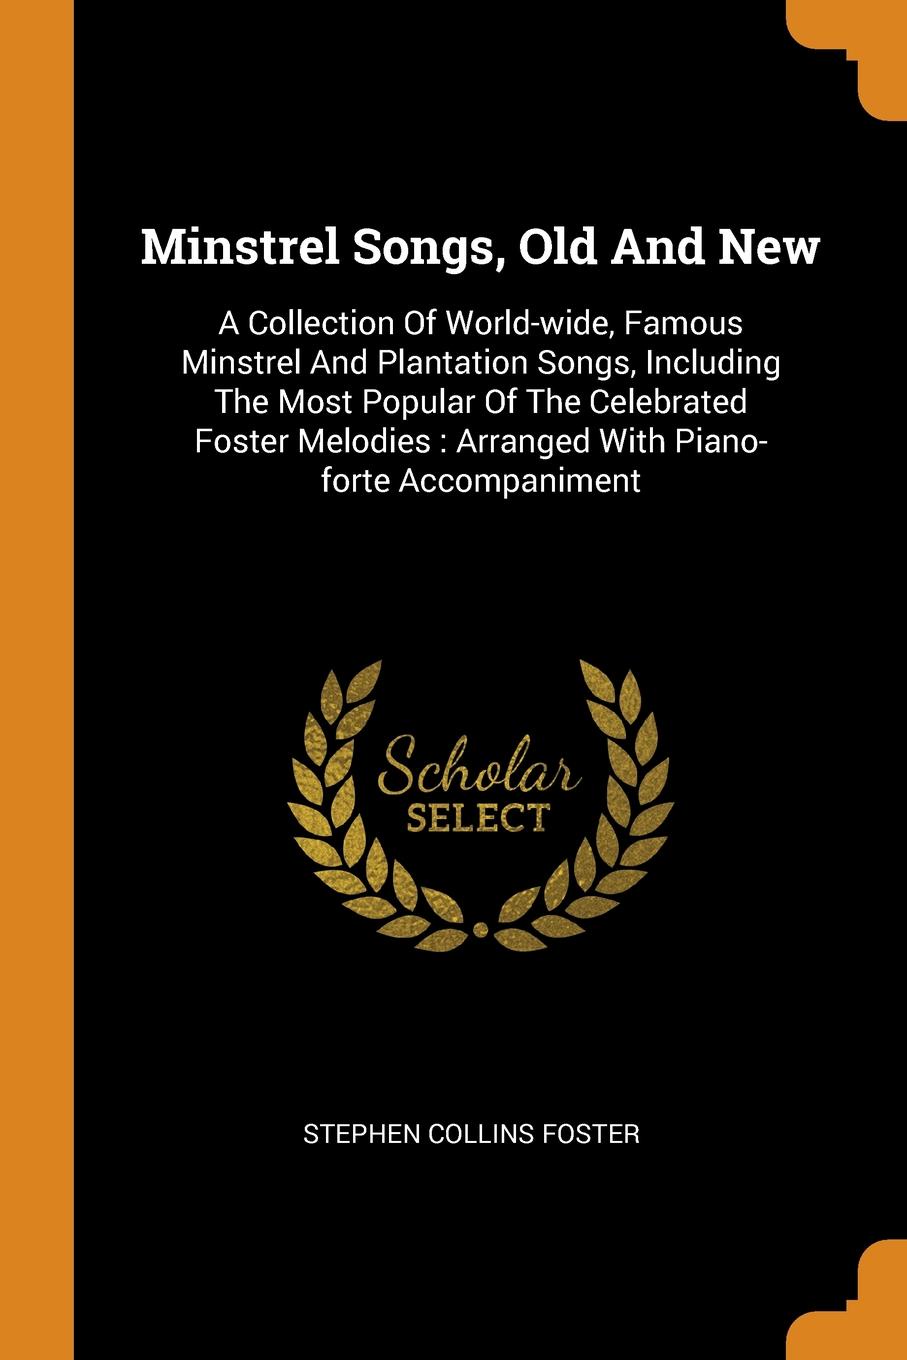 Minstrel Songs, Old And New. A Collection Of World-wide, Famous Minstrel And Plantation Songs, Including The Most Popular Of The Celebrated Foster Melodies : Arranged With Piano-forte Accompaniment